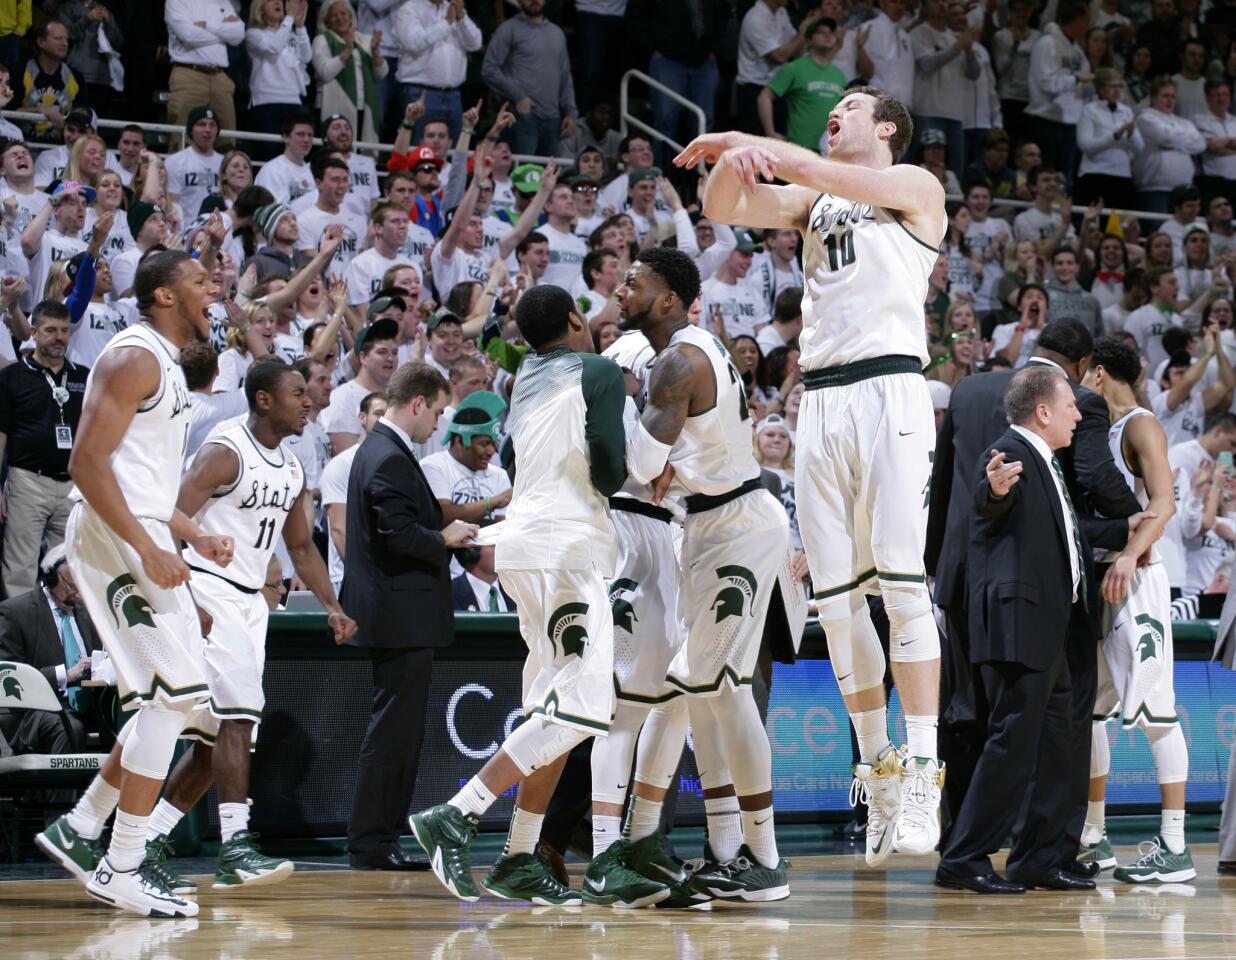 Michigan State players, including Matt Costello (10) celebrate during a game against Michigan at Breslin Student Events Center.